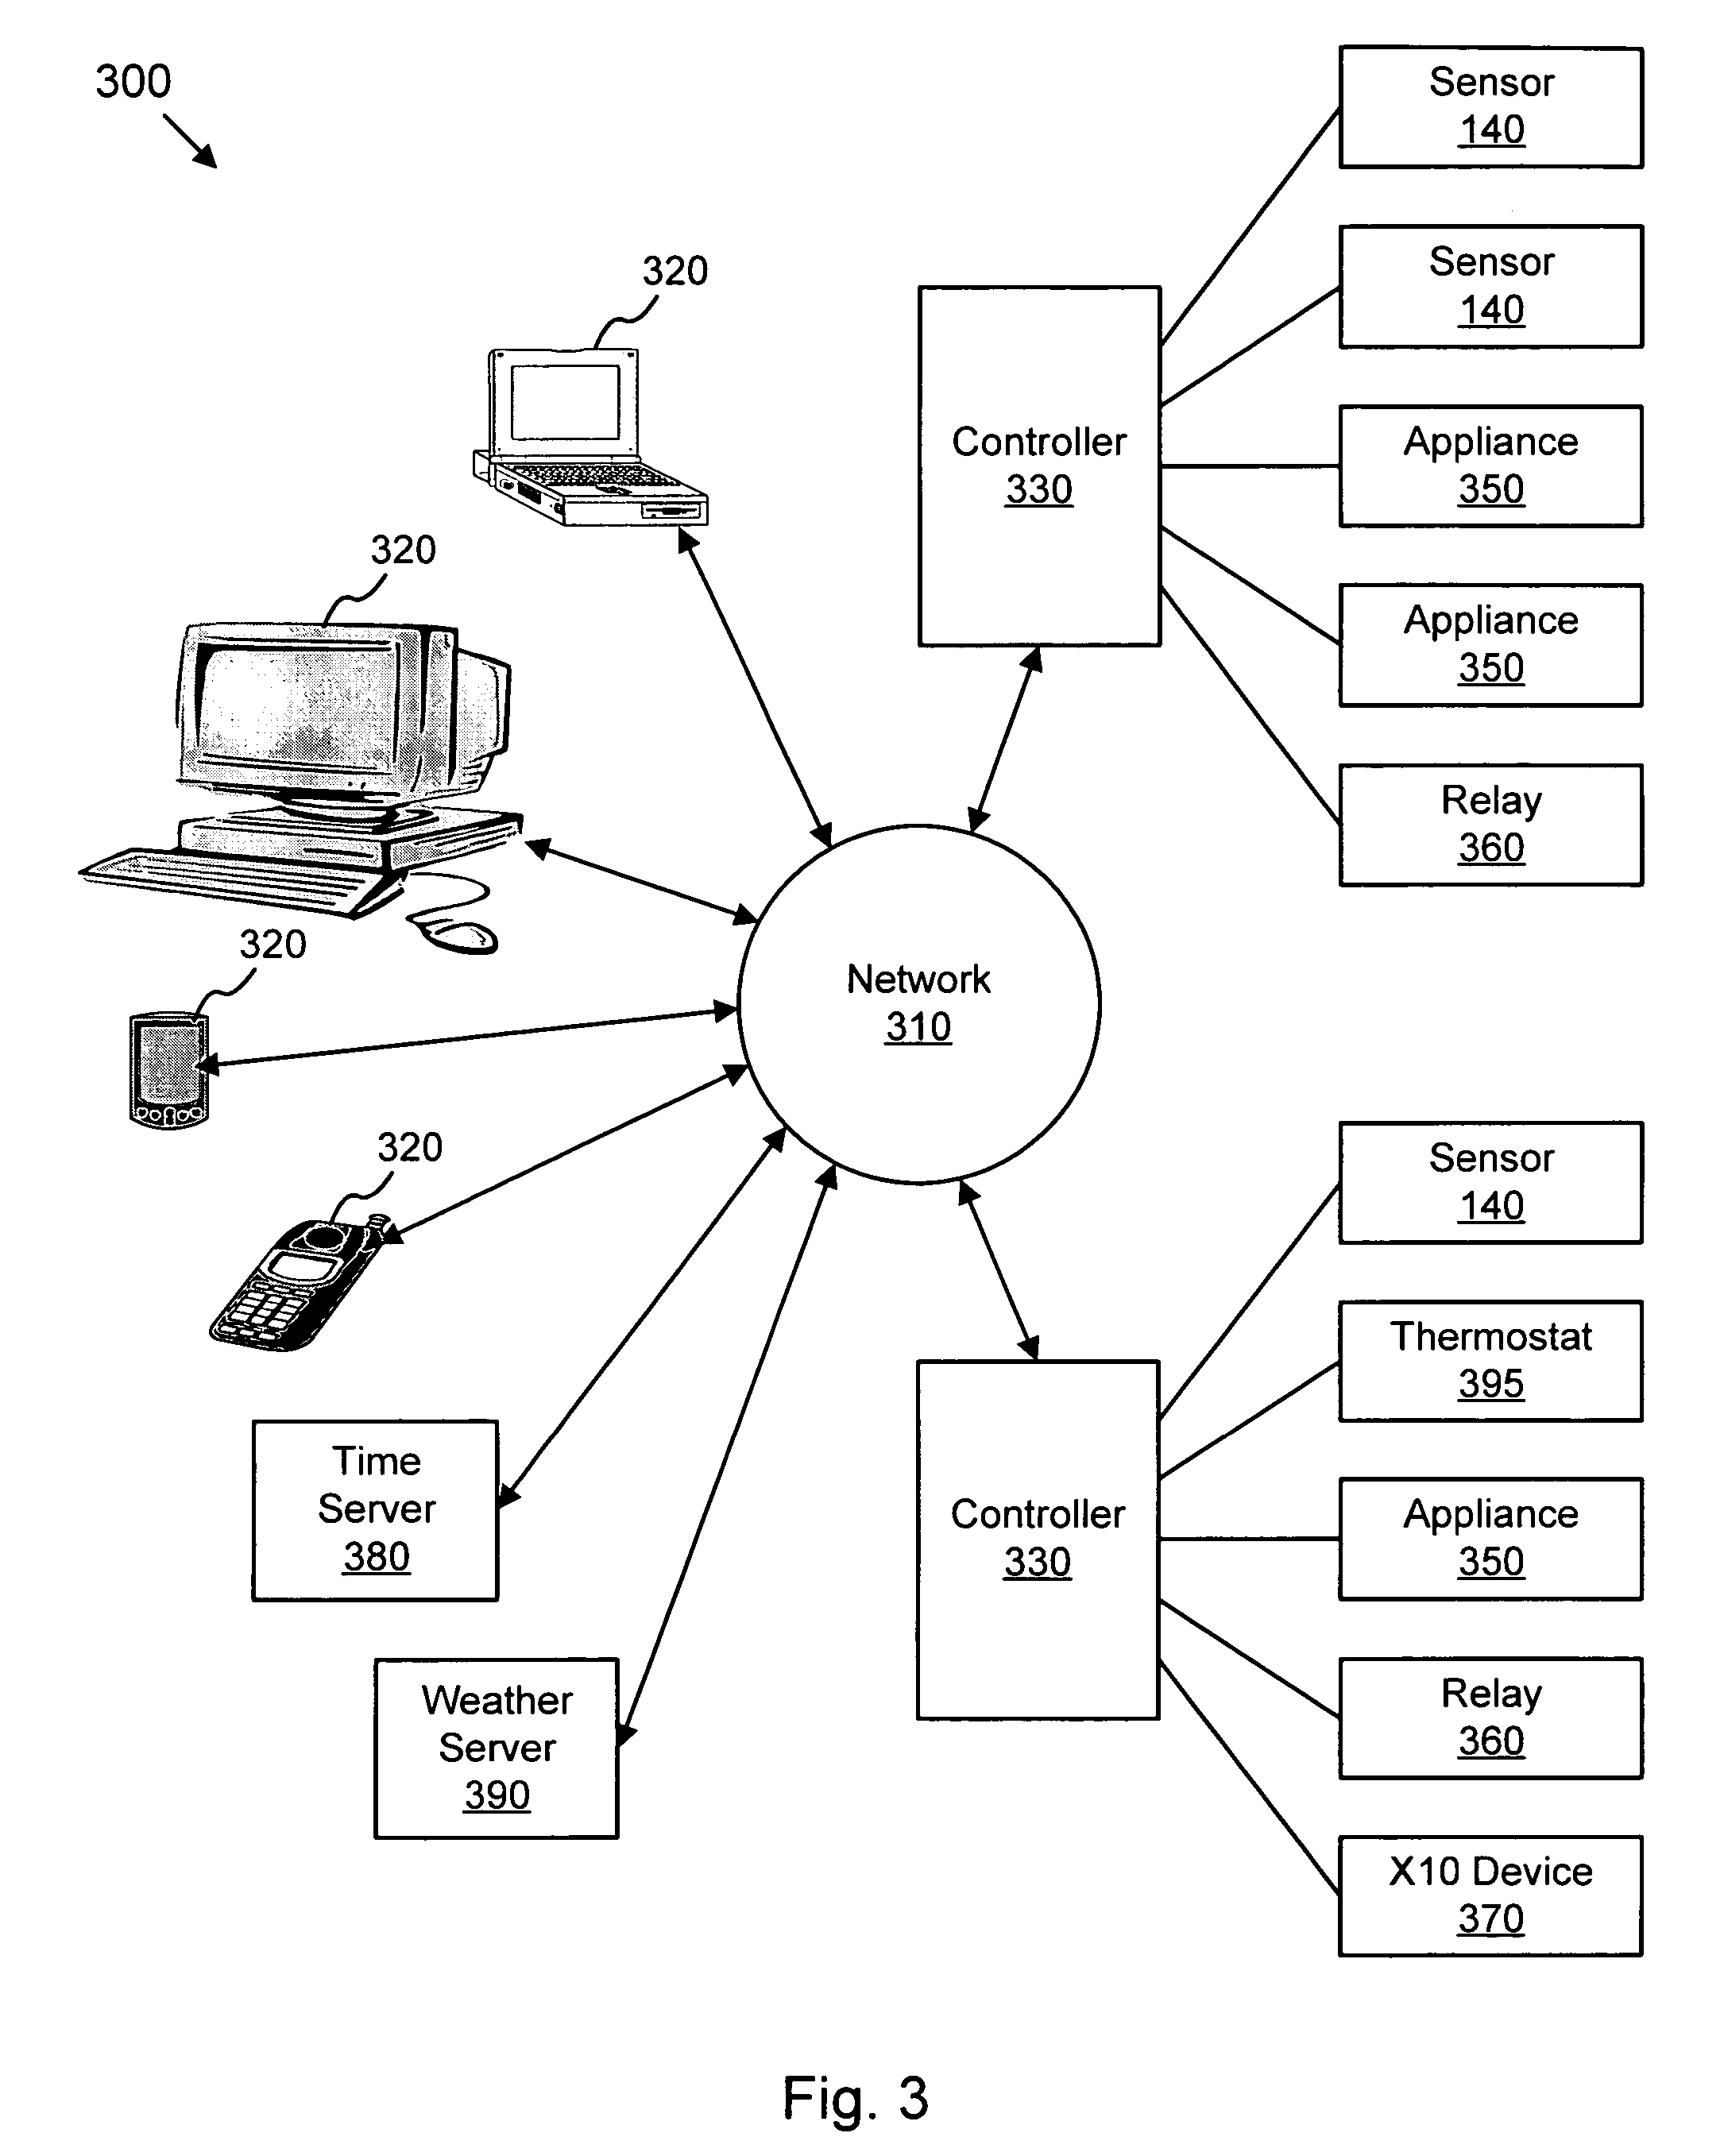 Irrigation controller with embedded web server